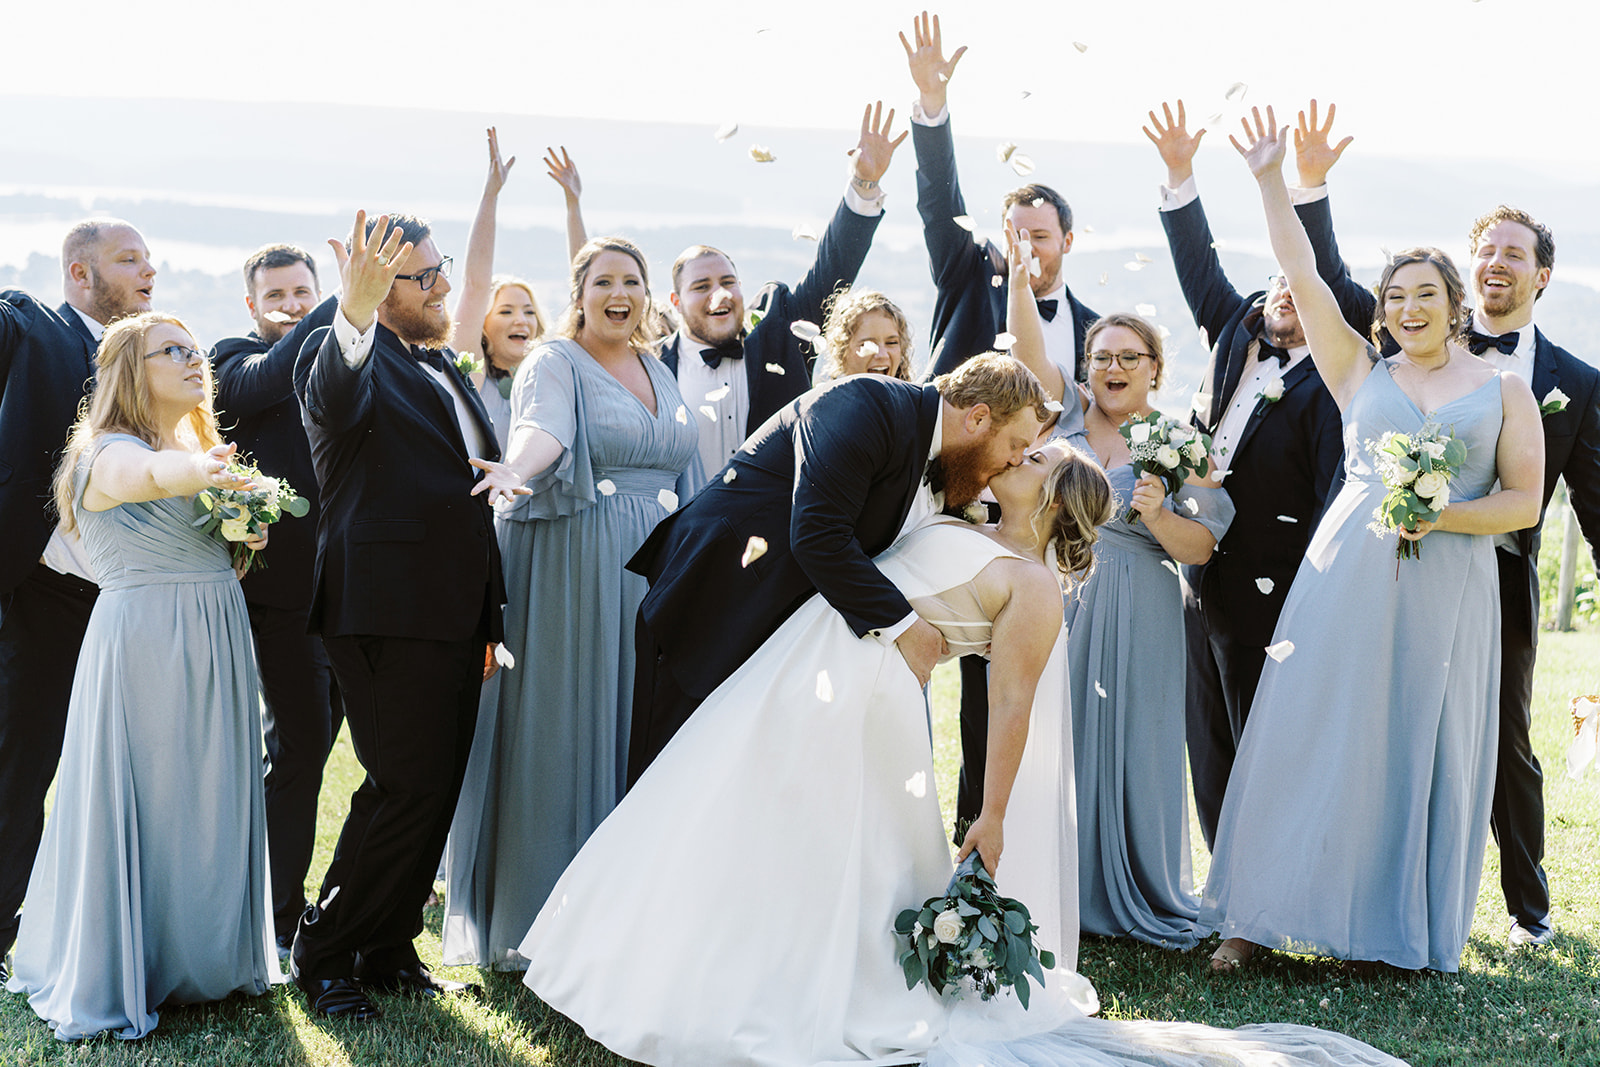 The wedding party throws petals over the bride and groom at Infinity Event Venue in Alabama